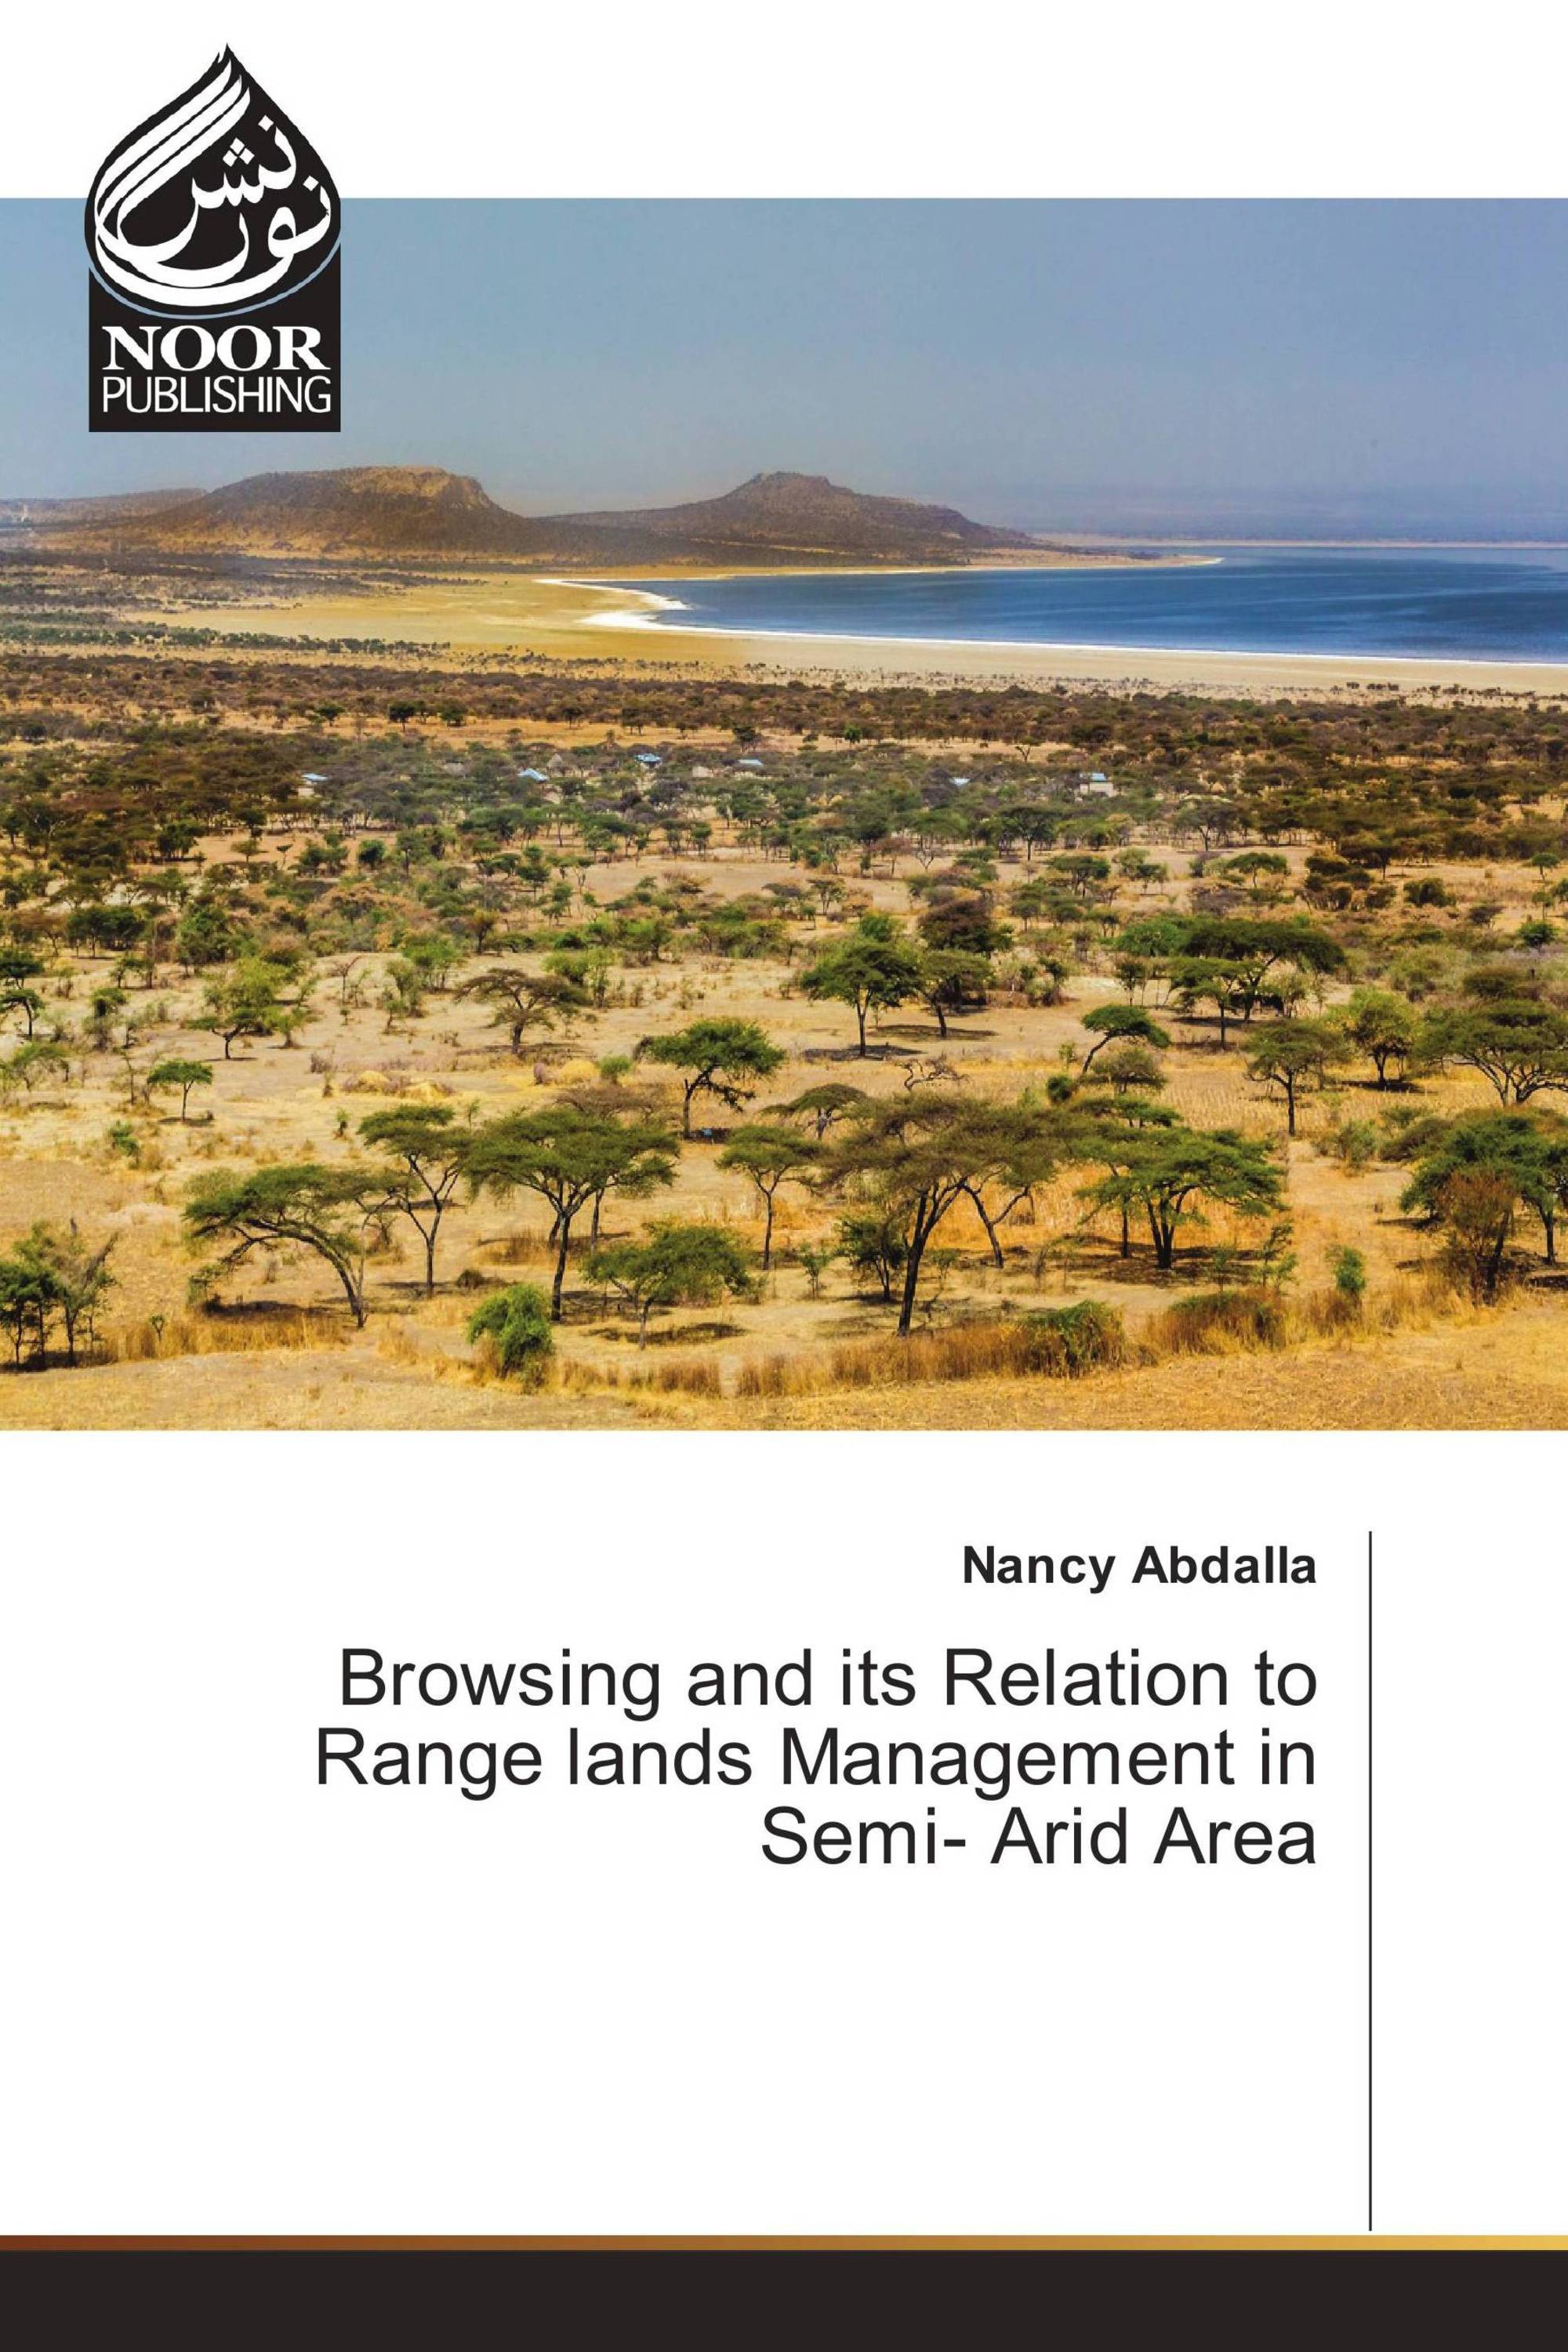 Browsing and its Relation to Range lands Management in Semi- Arid Area